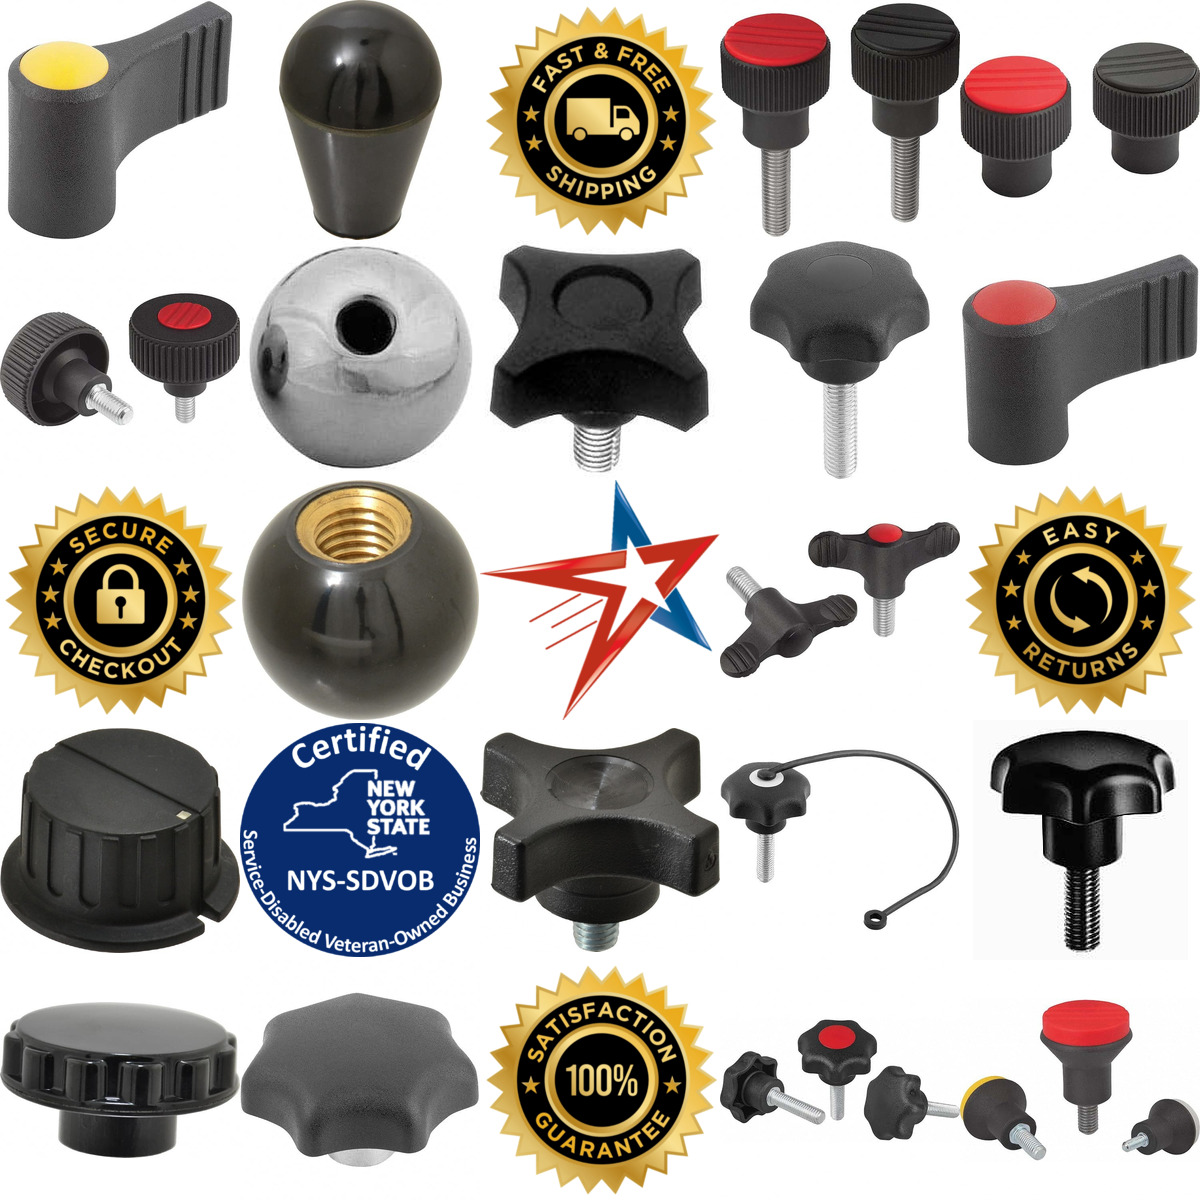 A selection of Knobs products on GoVets